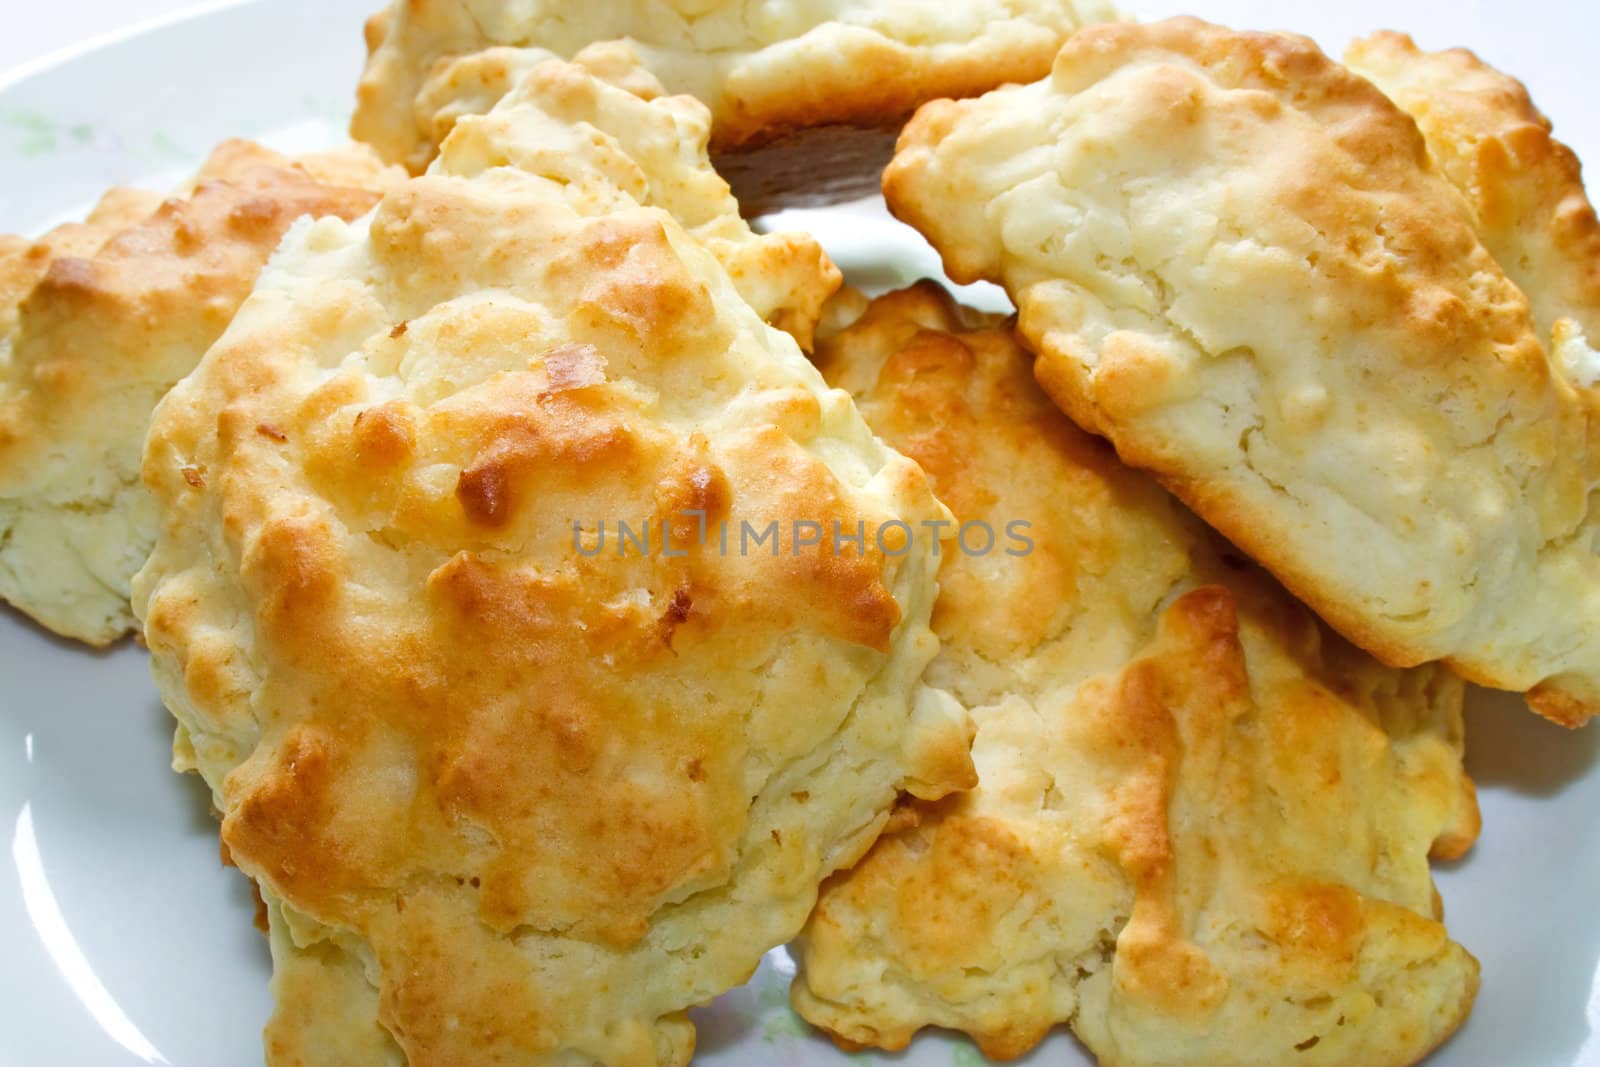 Fresh cooked biscuits ready to serve or eat